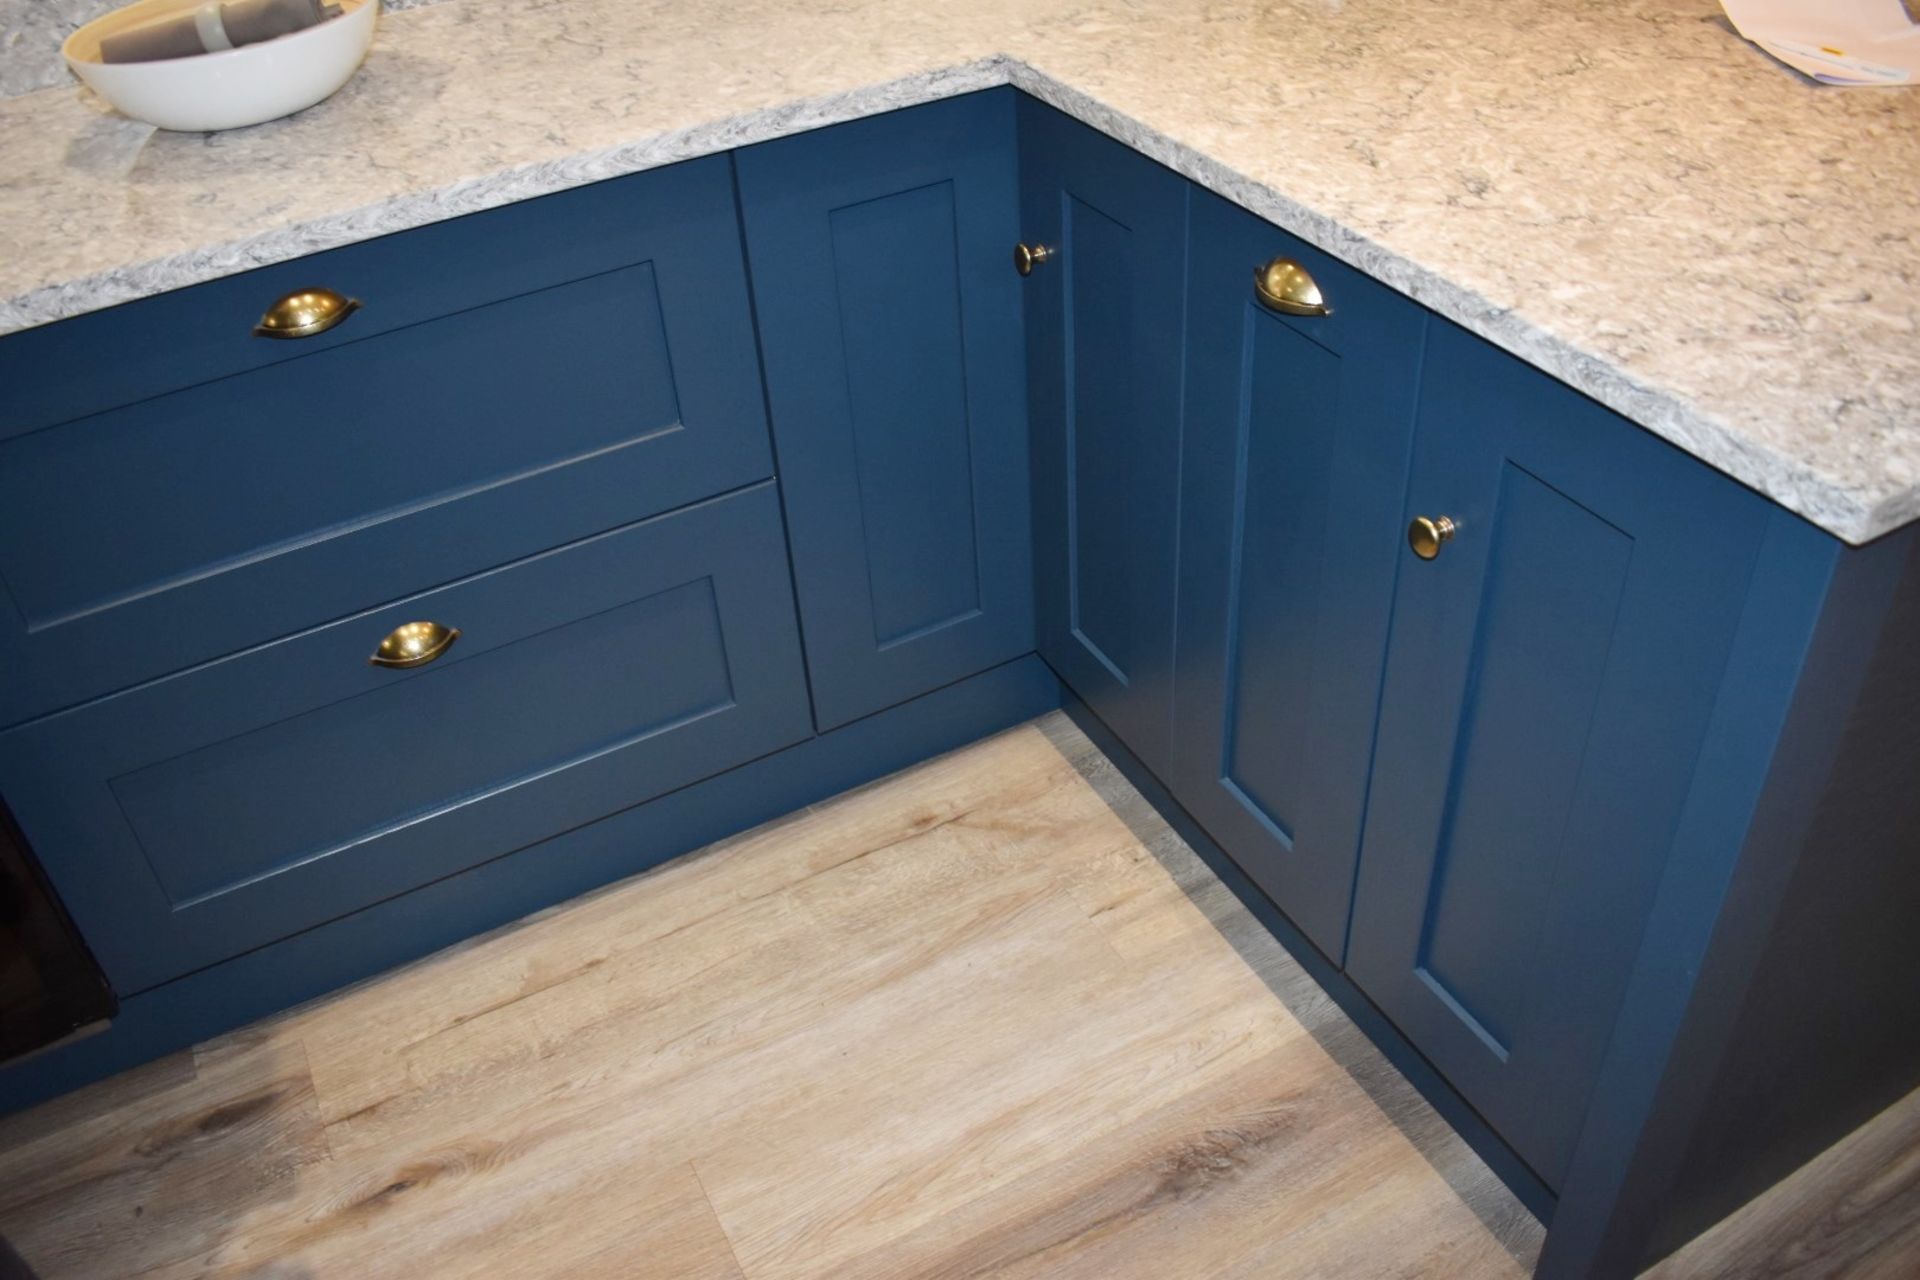 1 x 'Mornington' Shaker-style Feature-rich Fitted Kitchen in Blue, with Premium Branded Appliances - Image 63 of 67